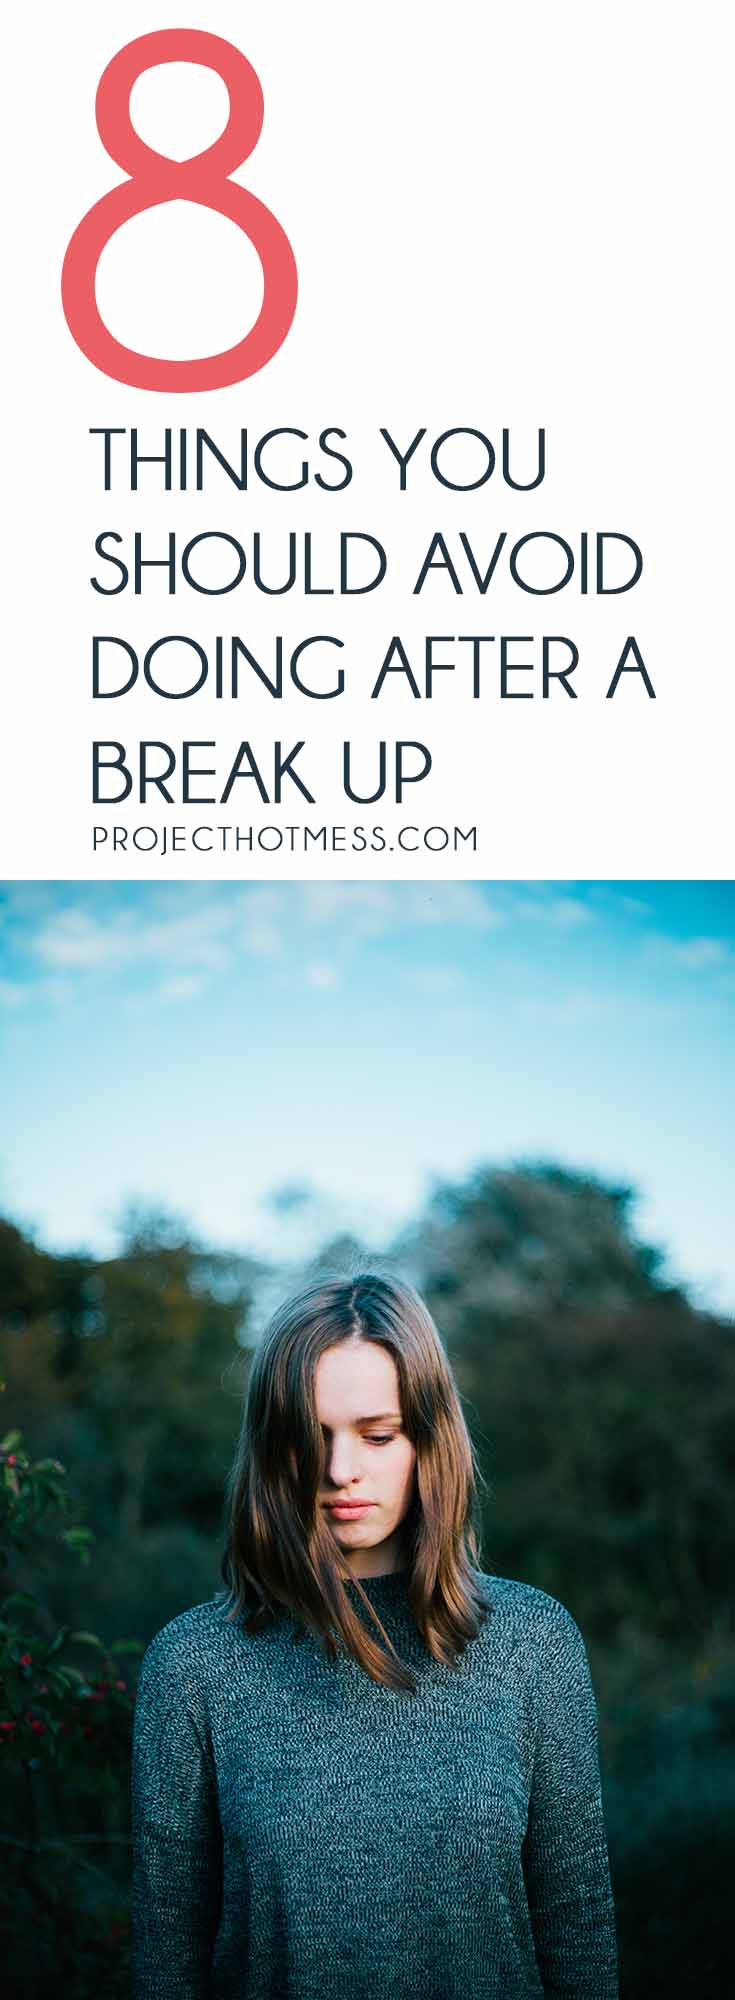 Break ups are rough, even if you're the one who instigated it. And while it might be tempting to take to Facebook and rage out, there are some things you should avoid doing after a break up. These things aren't going to help you and are going to make you feel crappy in the long run. Make sure you're not doing these: